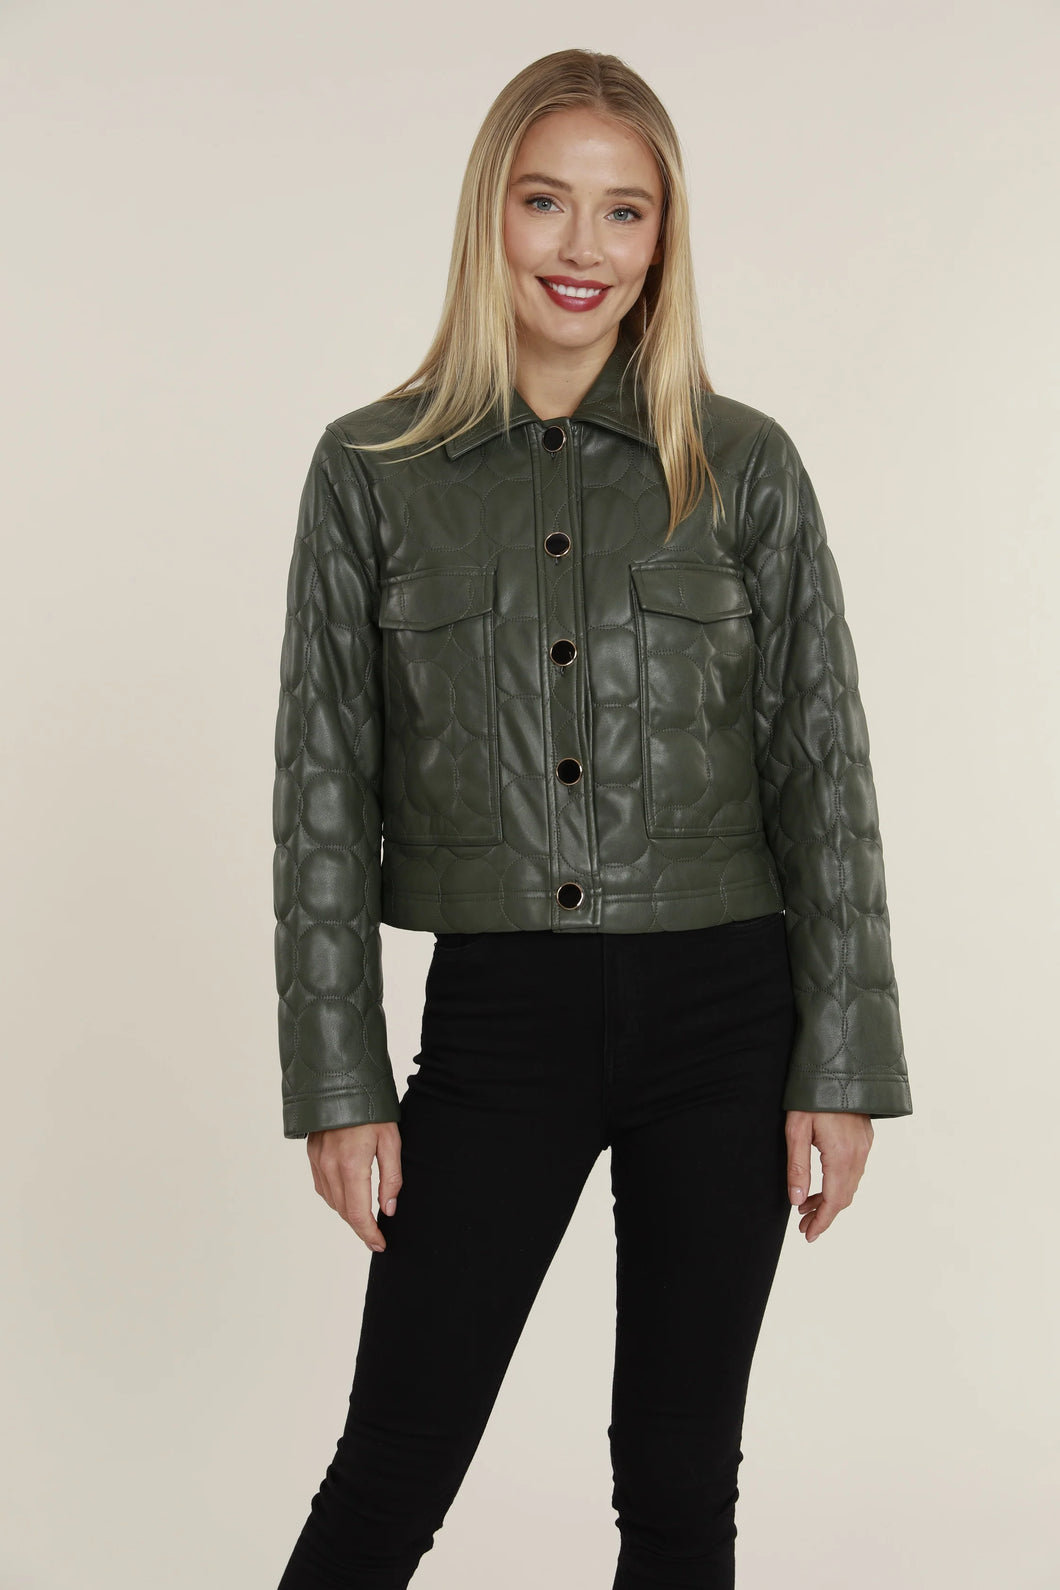 Vegan Leather Quilted Jacket - Available in Army, Beige & Black